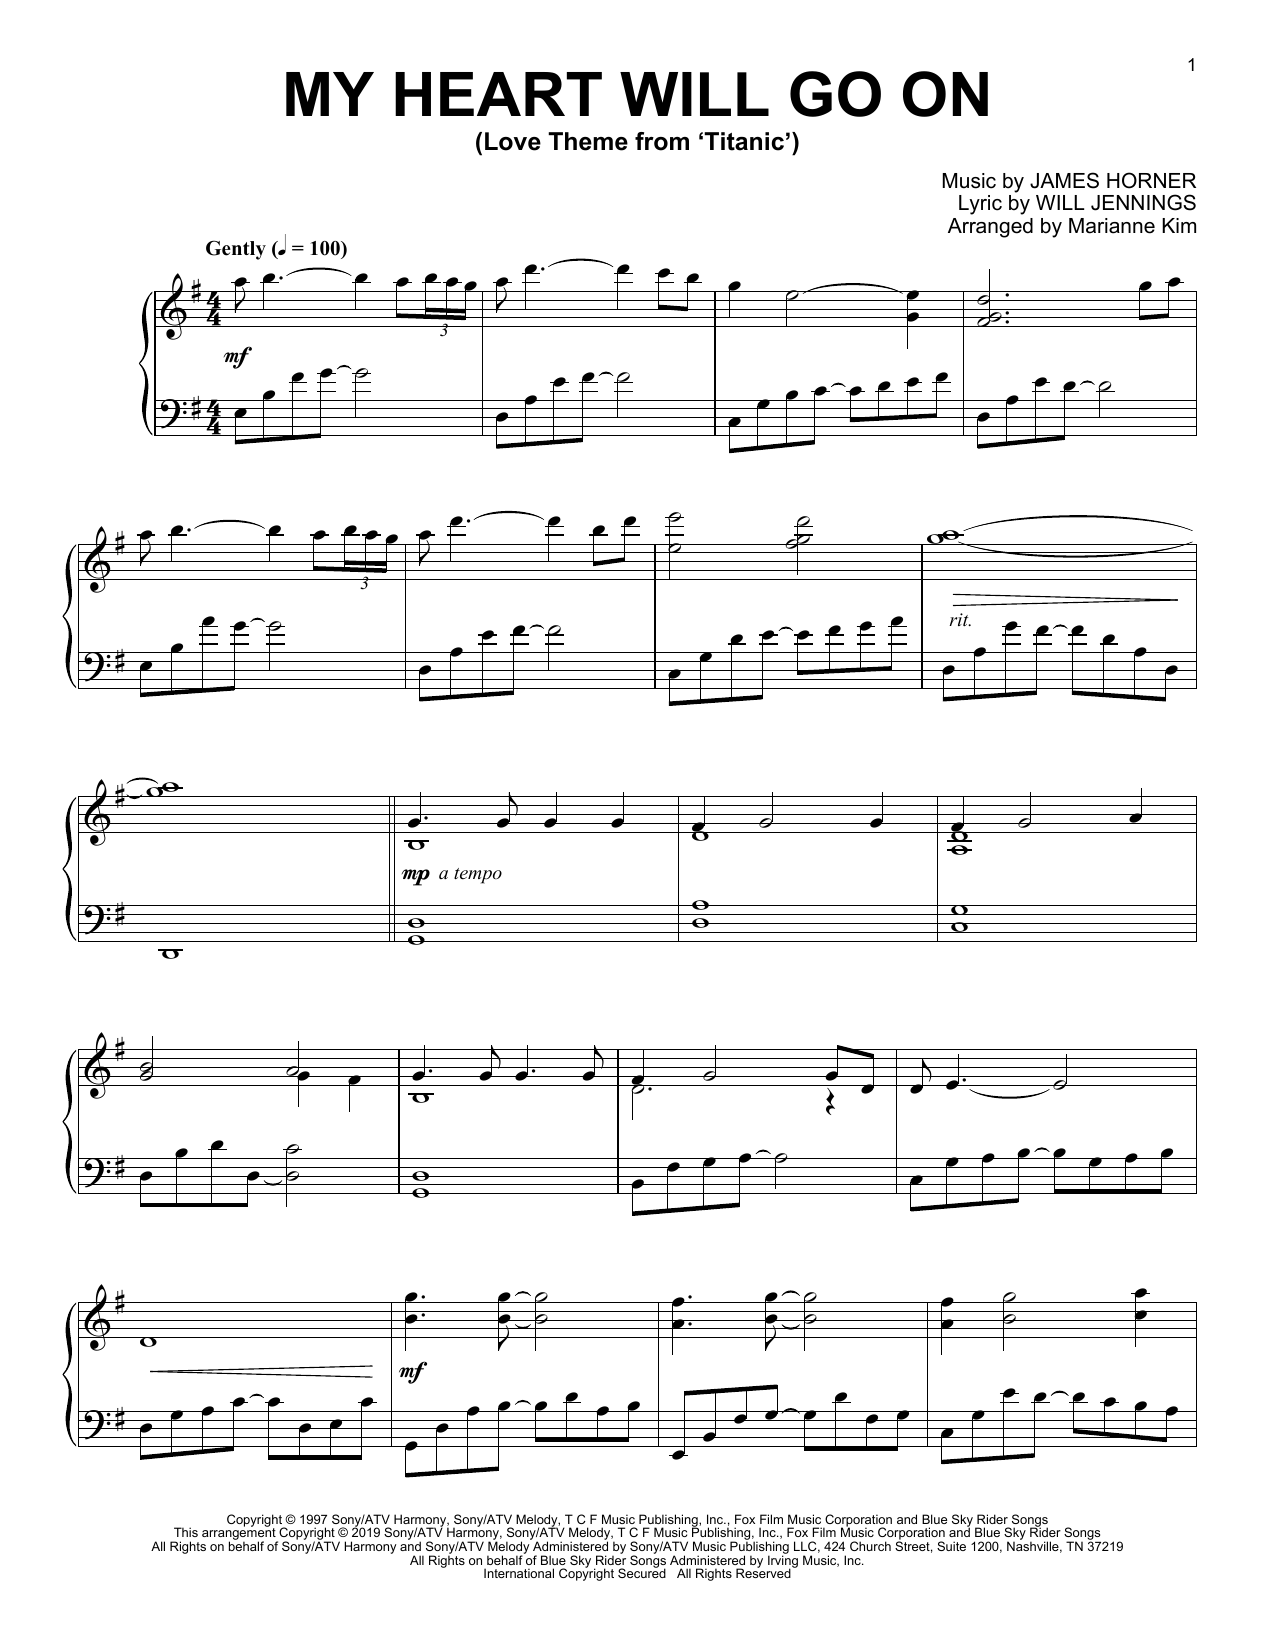 Celine Dion My Heart Will Go On Love Theme From Titanic Arr Marianne Kim Sheet Music